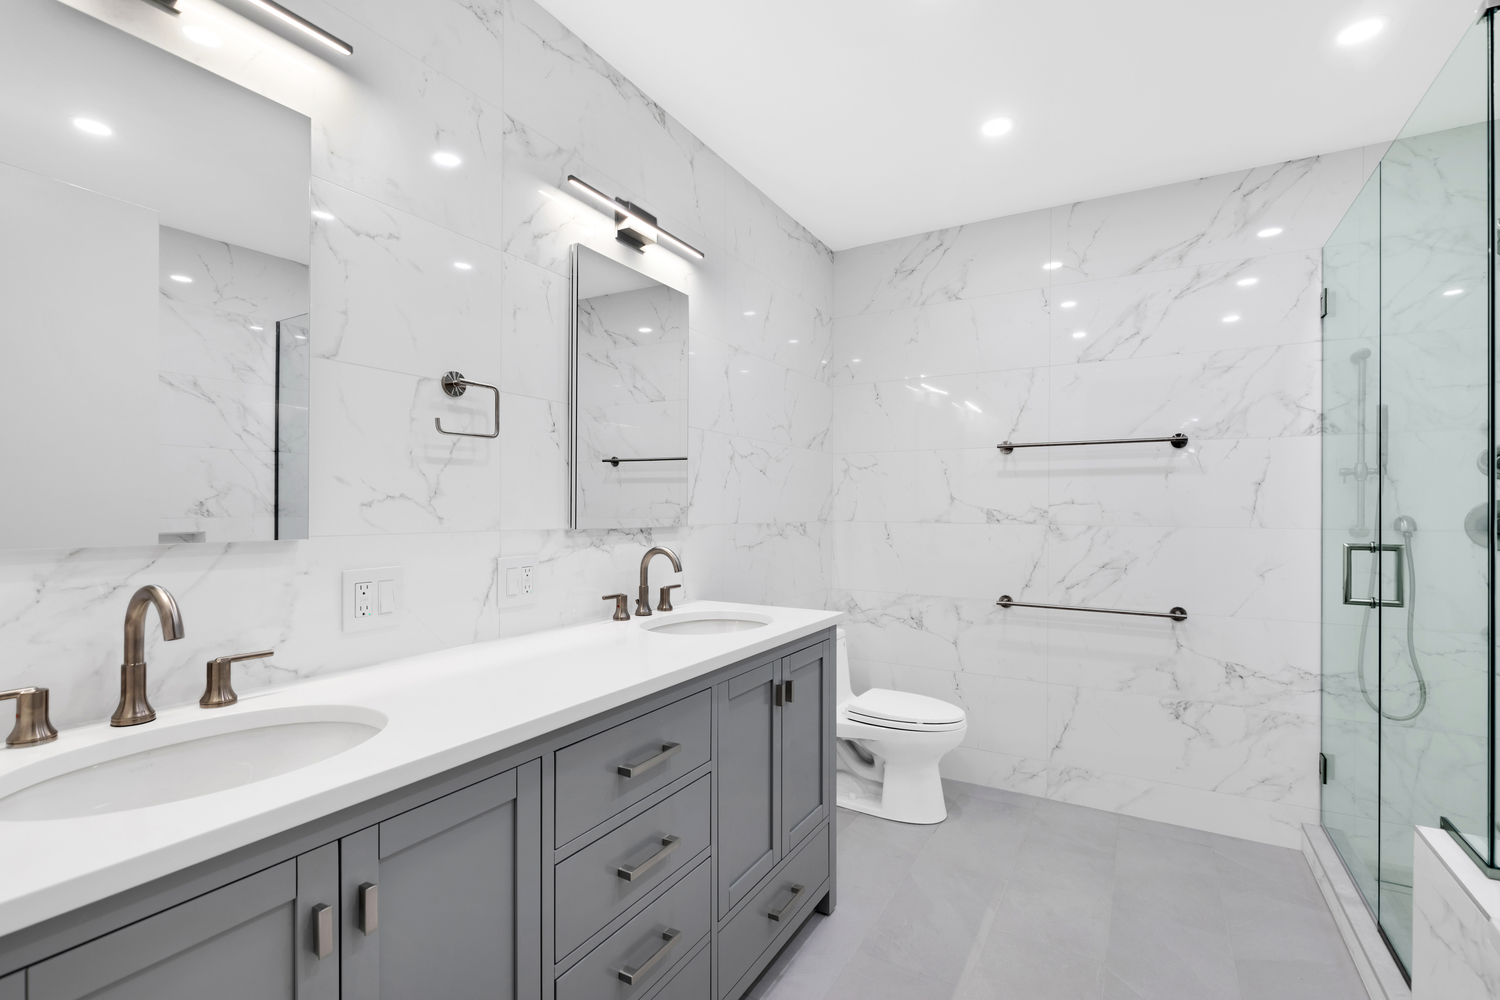 Remodeled bathroom with double vanity, gray cabinets, and white tile walls.